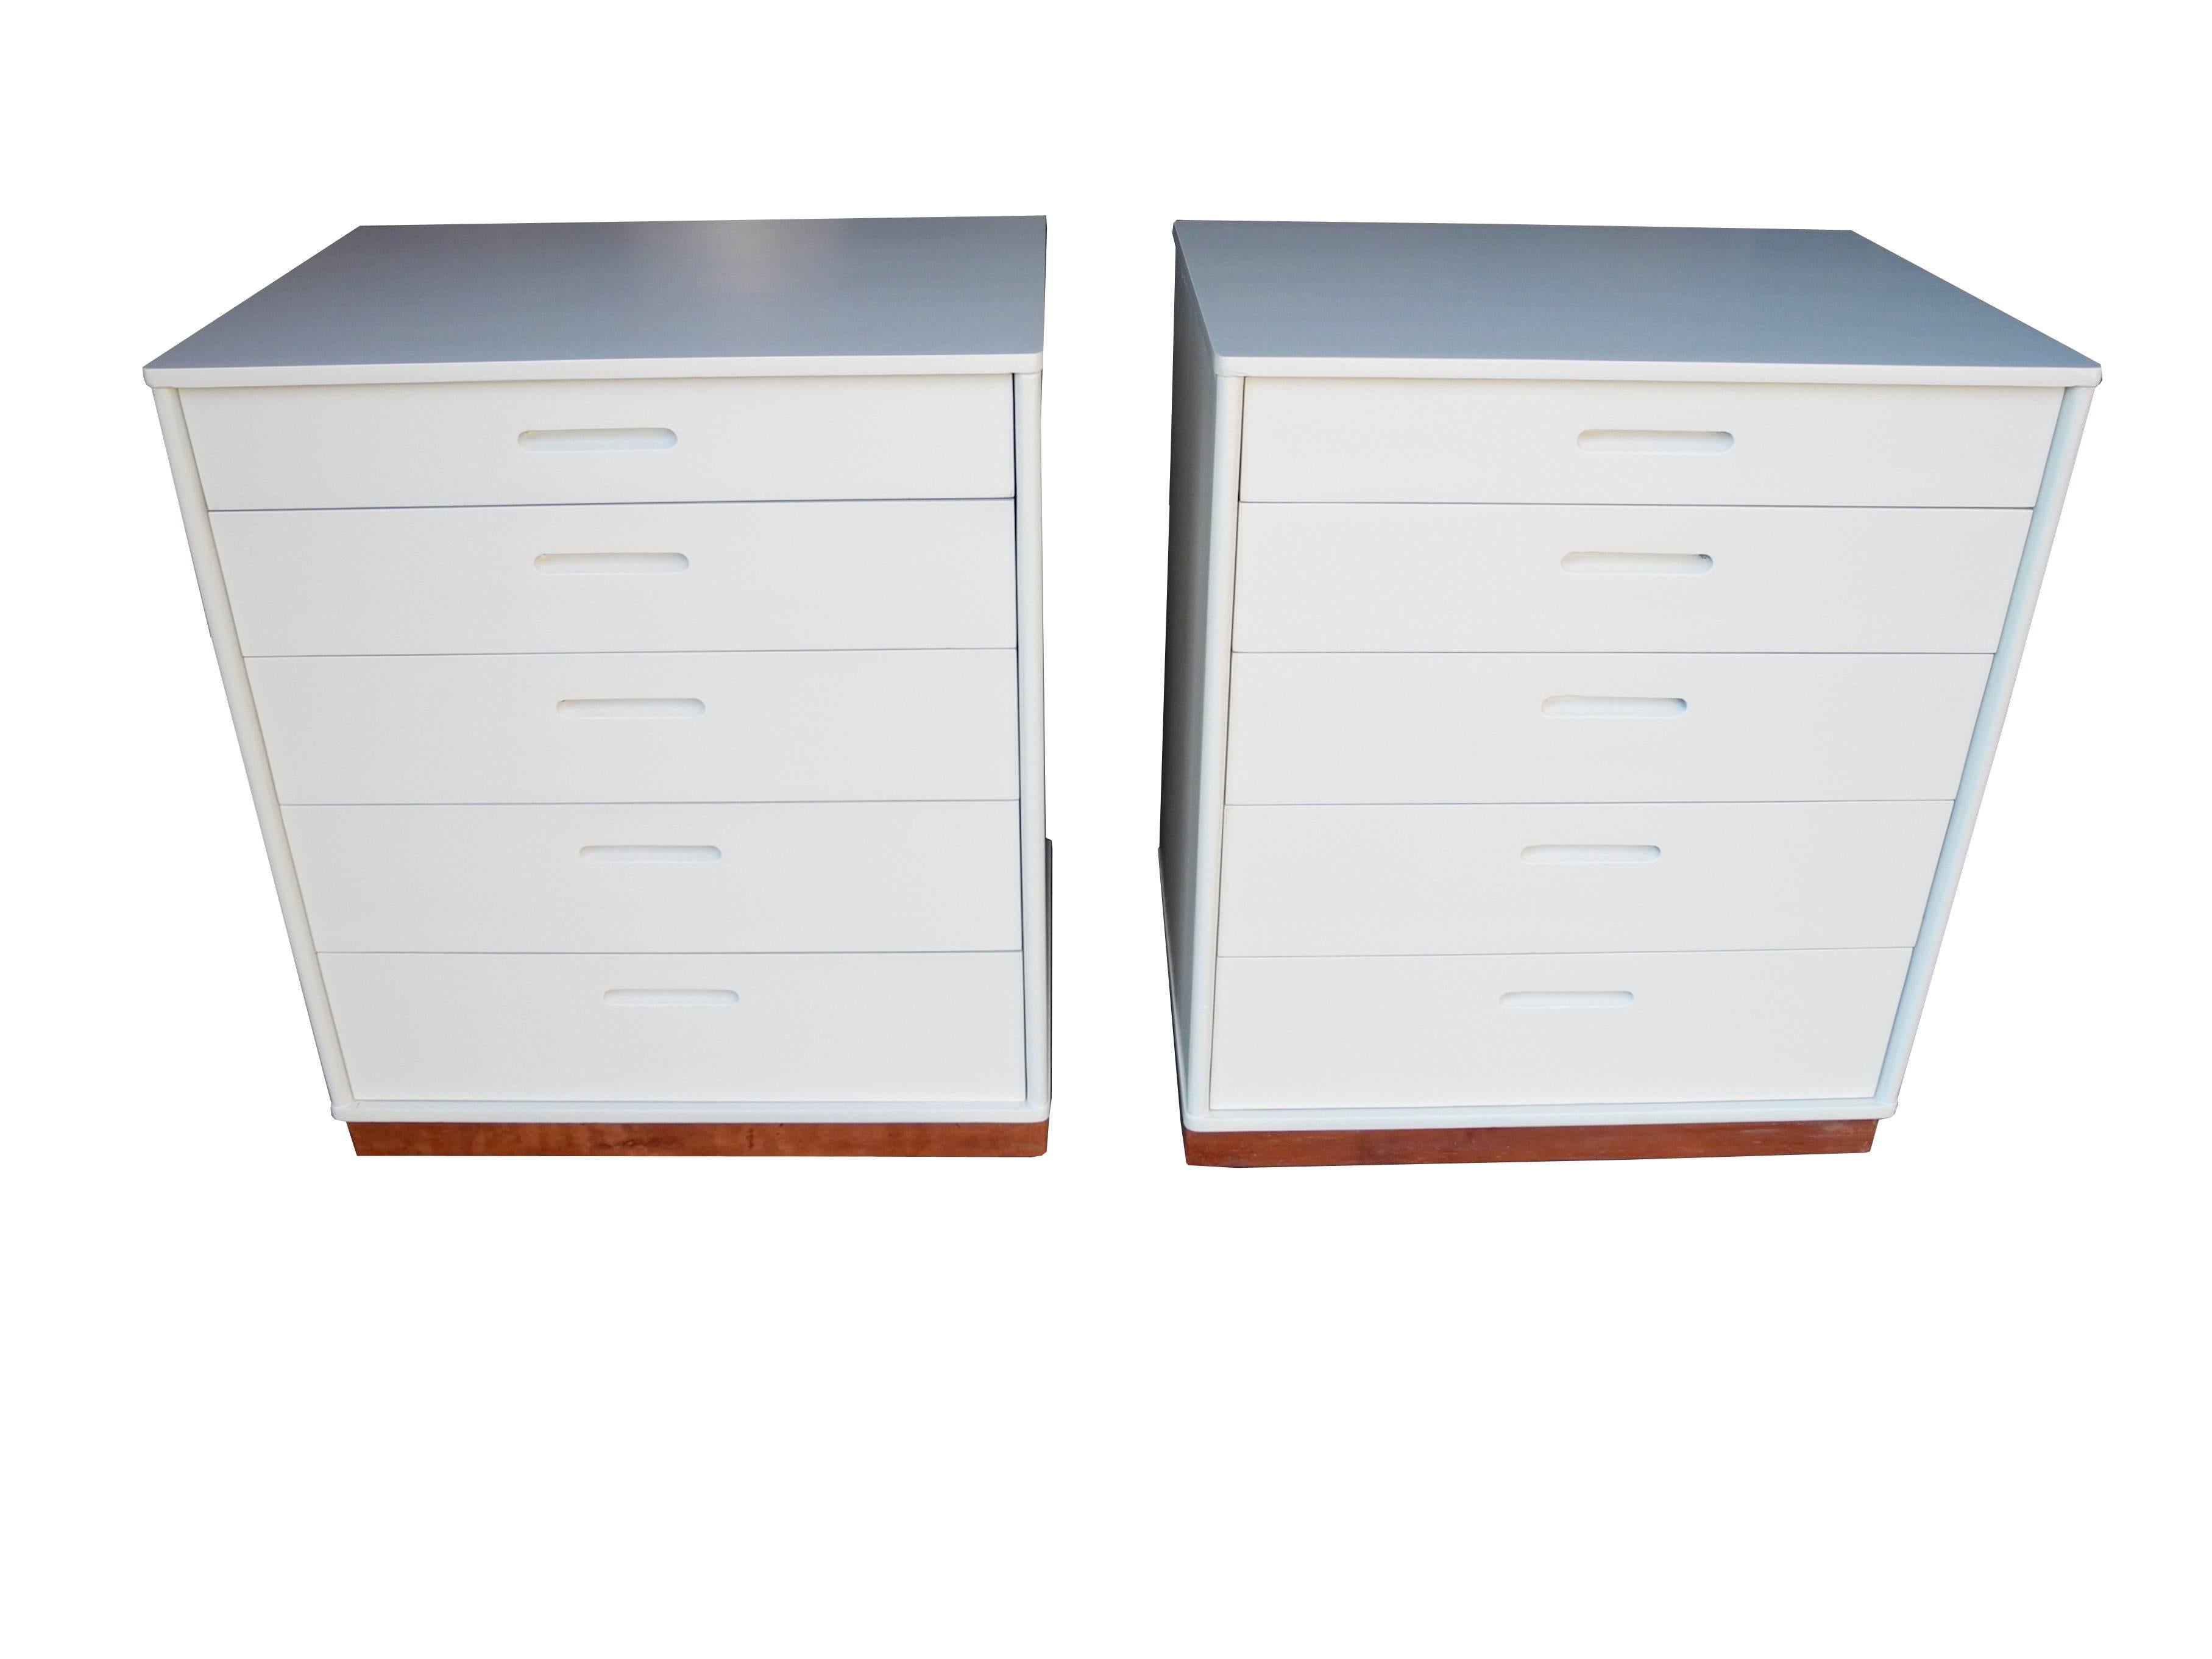 These small white matching dressers or nightstands equipped with five drawers each are painted in a linen white and lacquered. The plinth is wrapped in leather and the rounded side edges are examples of Wormely's attention to detail.